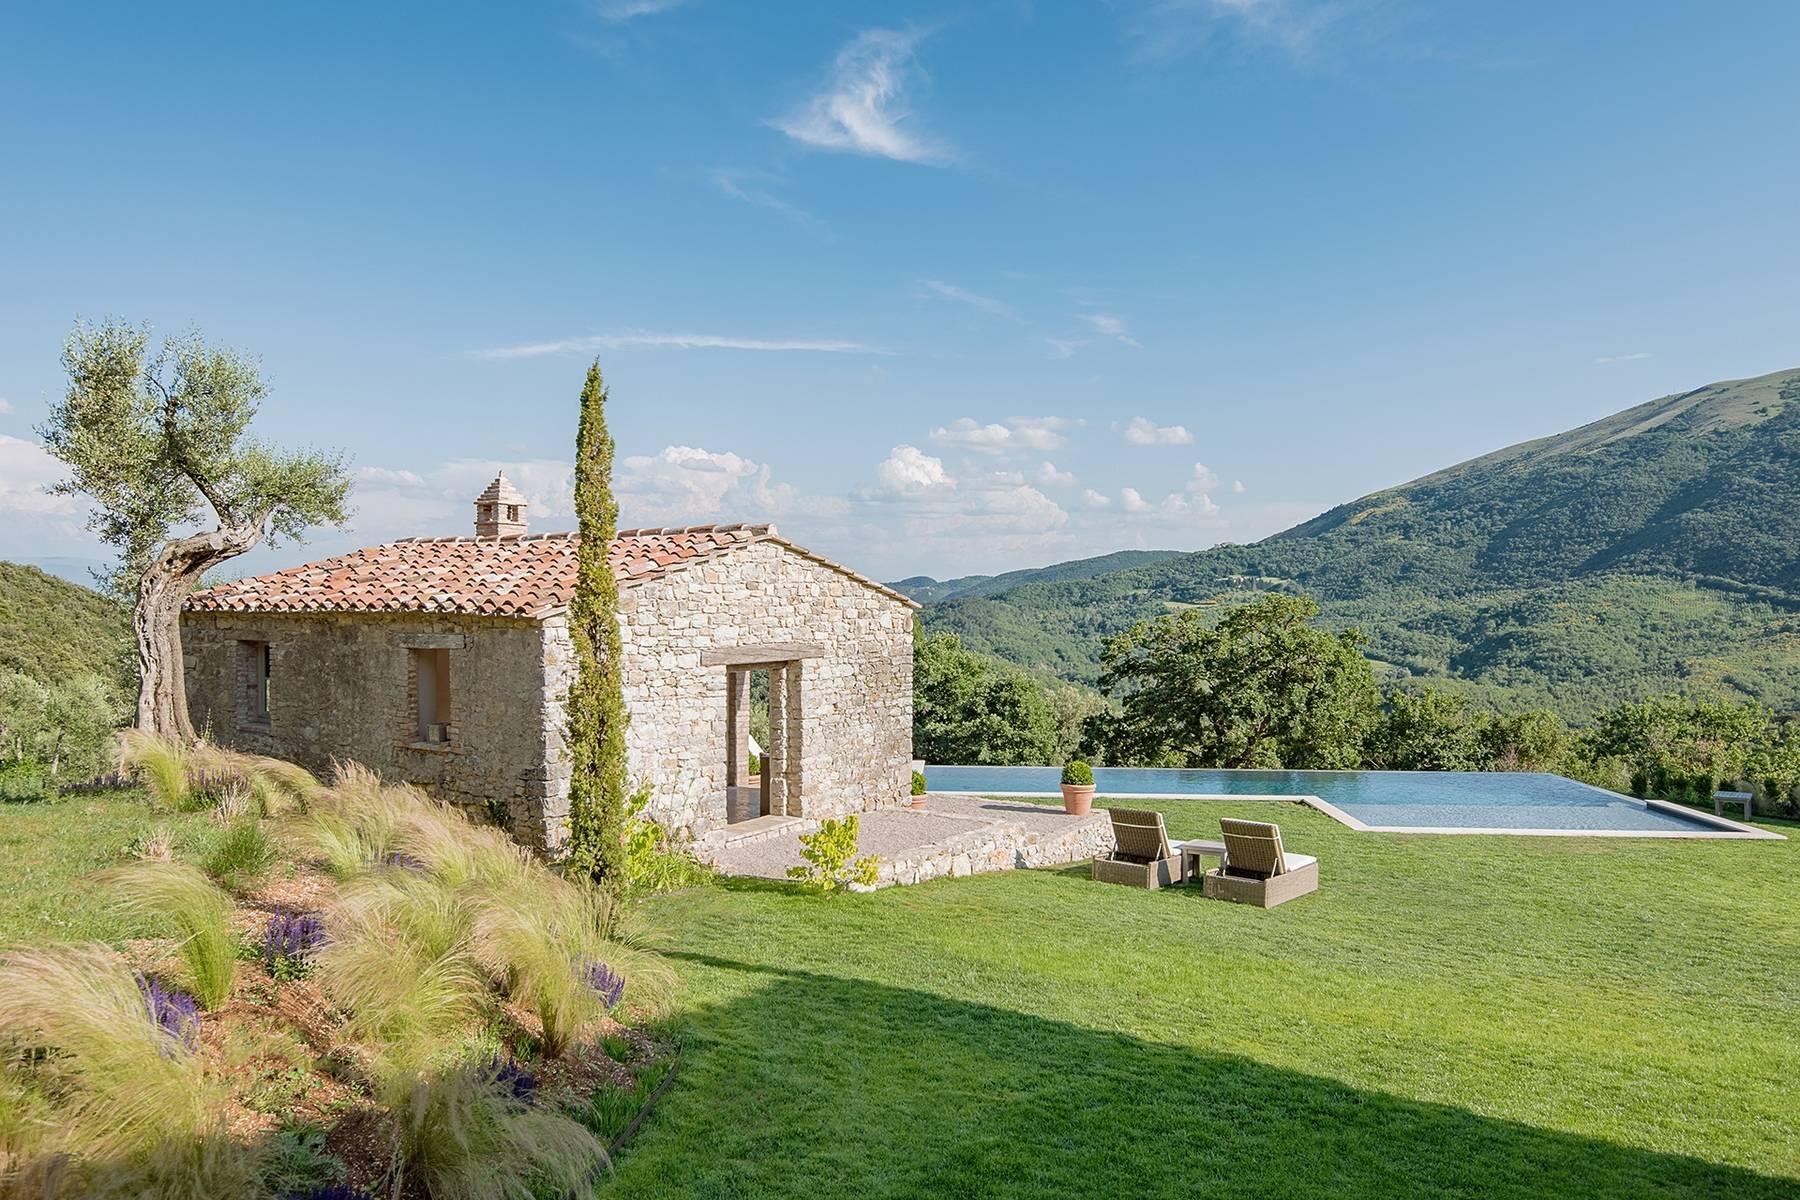 Complete privacy and luxury amidst the picturesque Umbrian countryside - 20